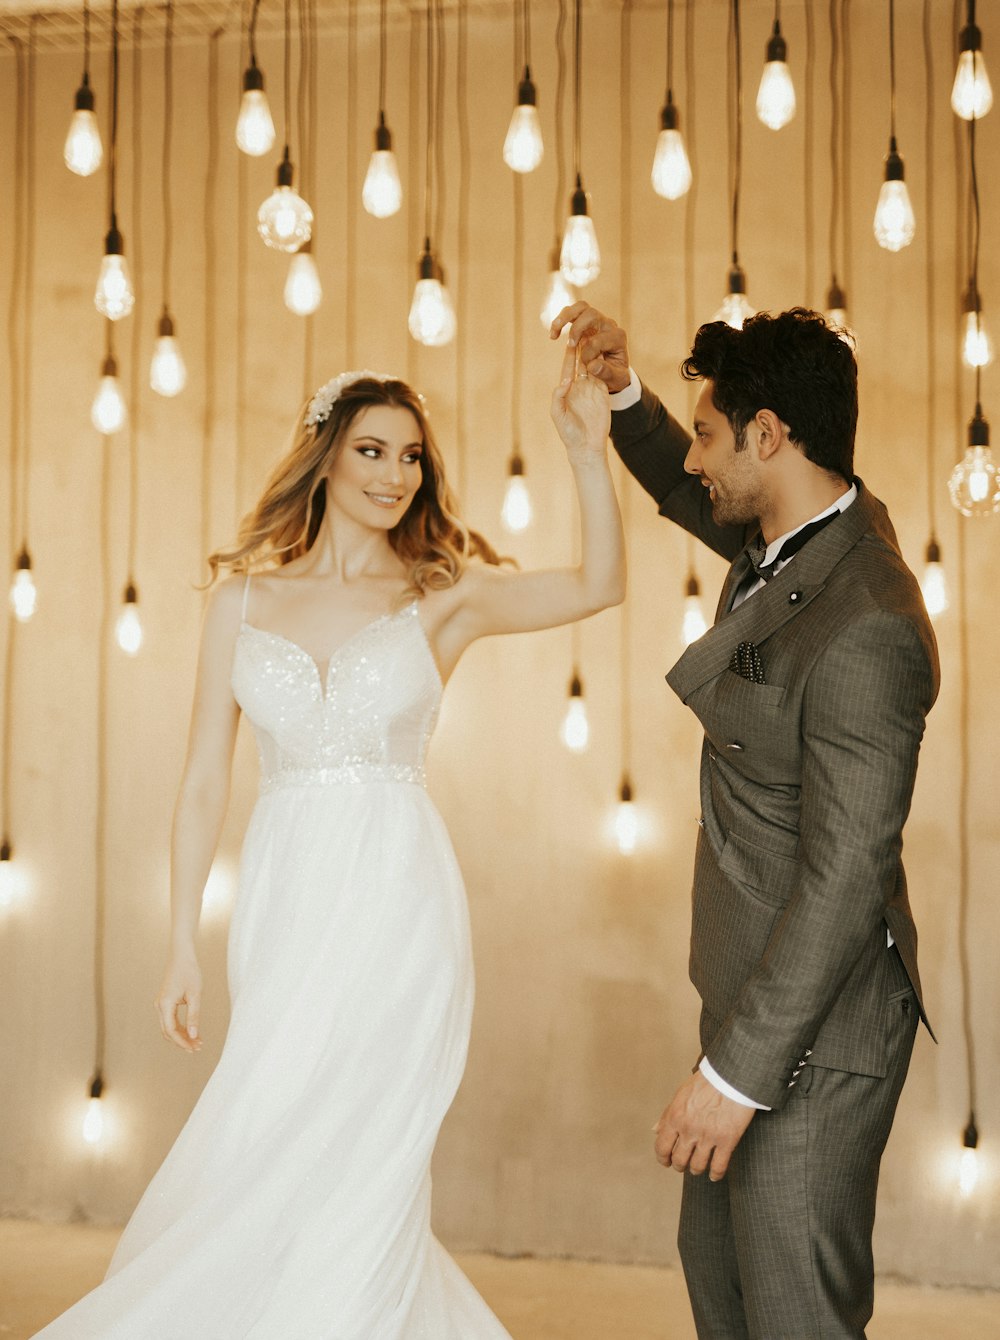 a bride and groom dancing in front of hanging lights